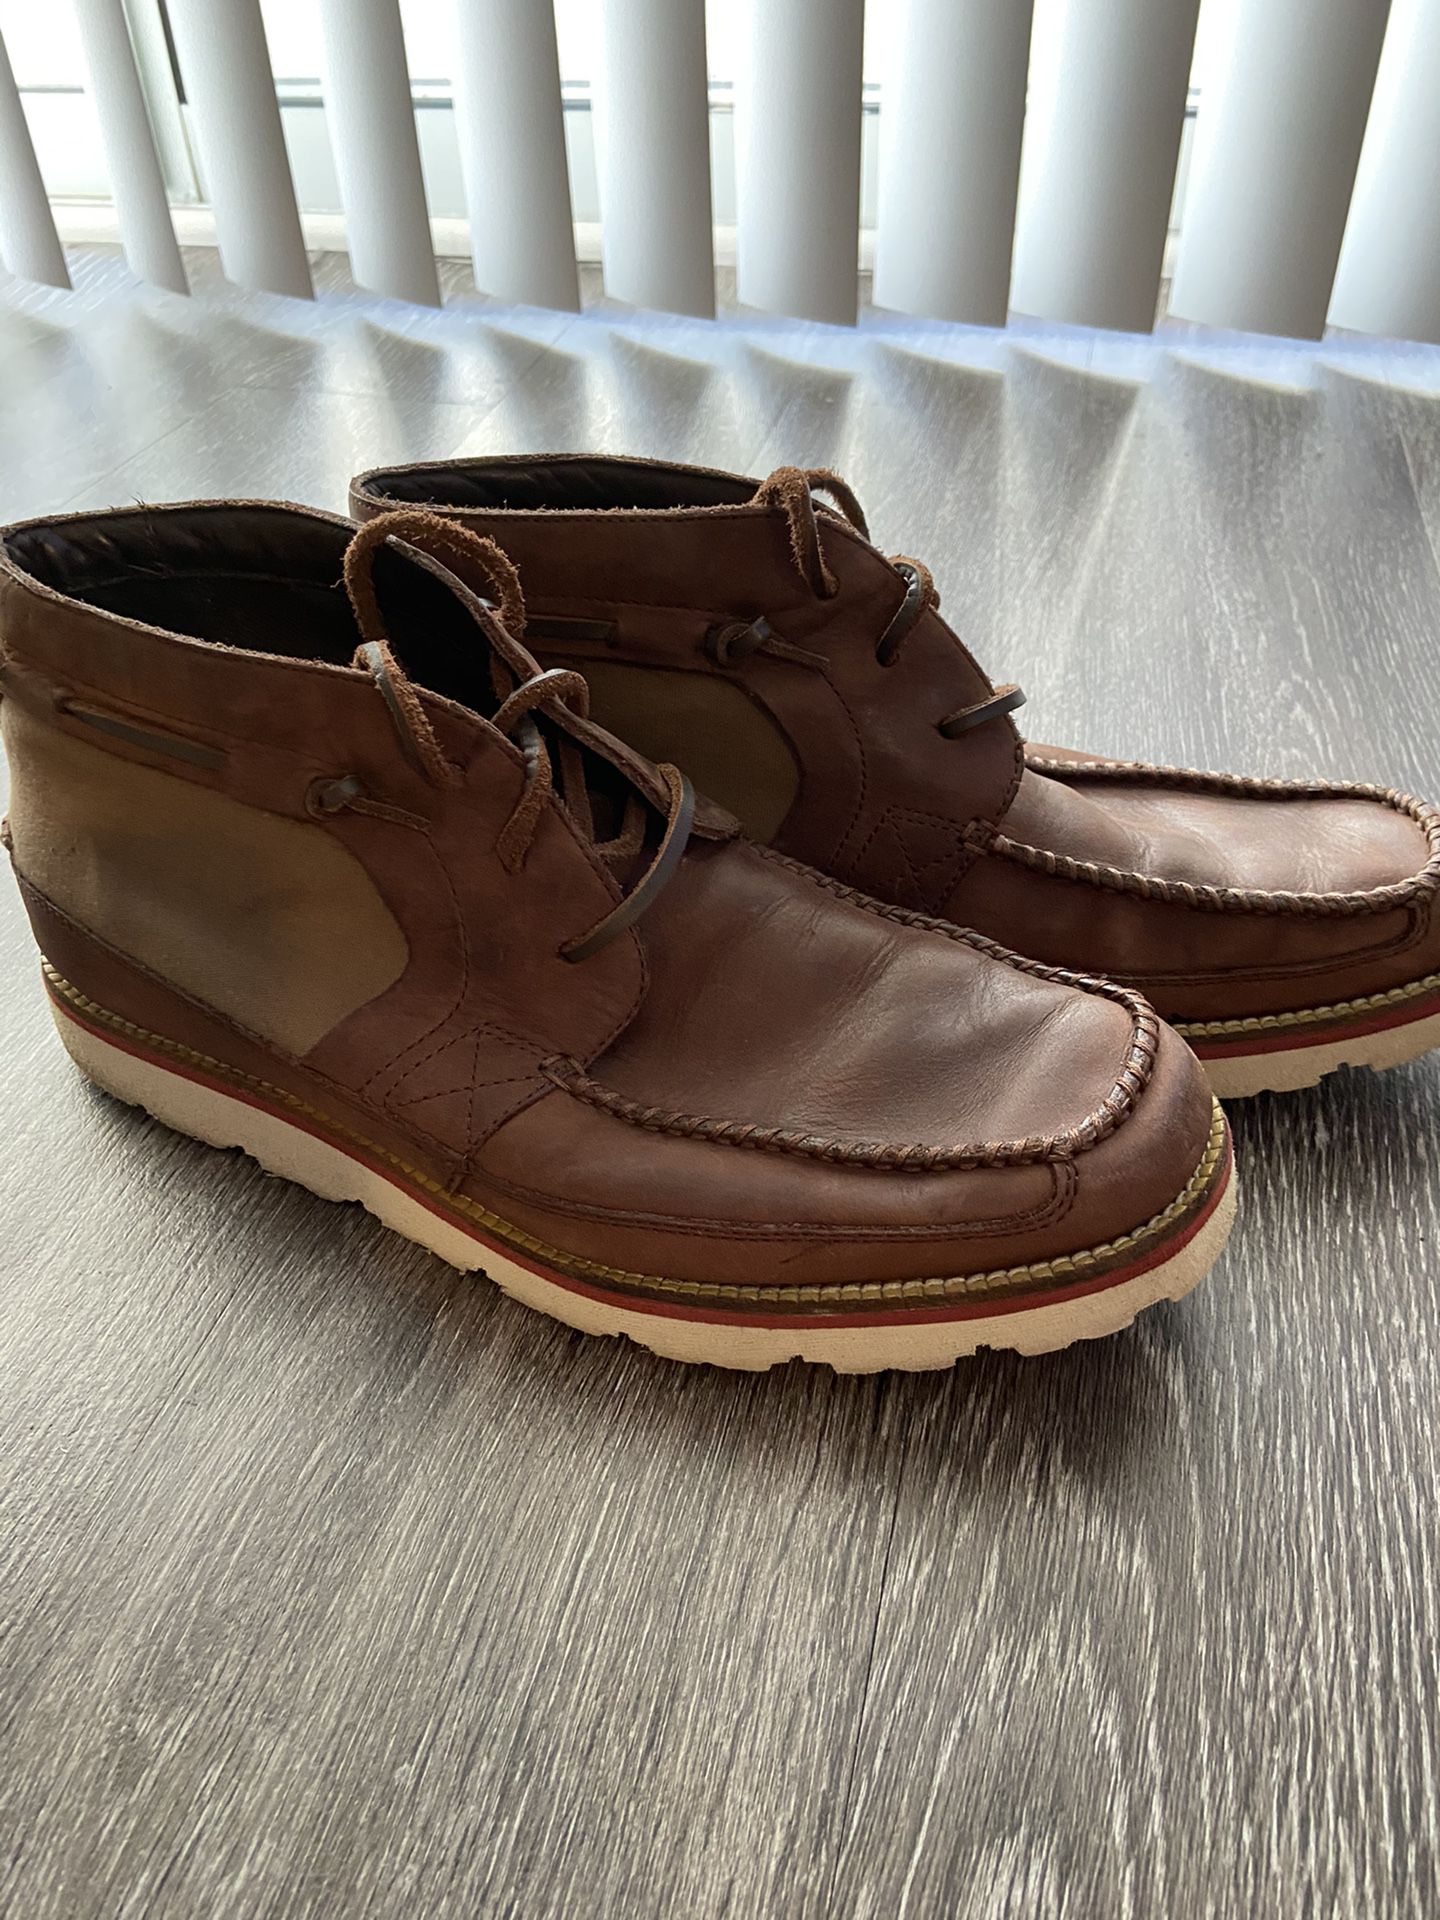 Cole haan leather chukka boots size 10.5